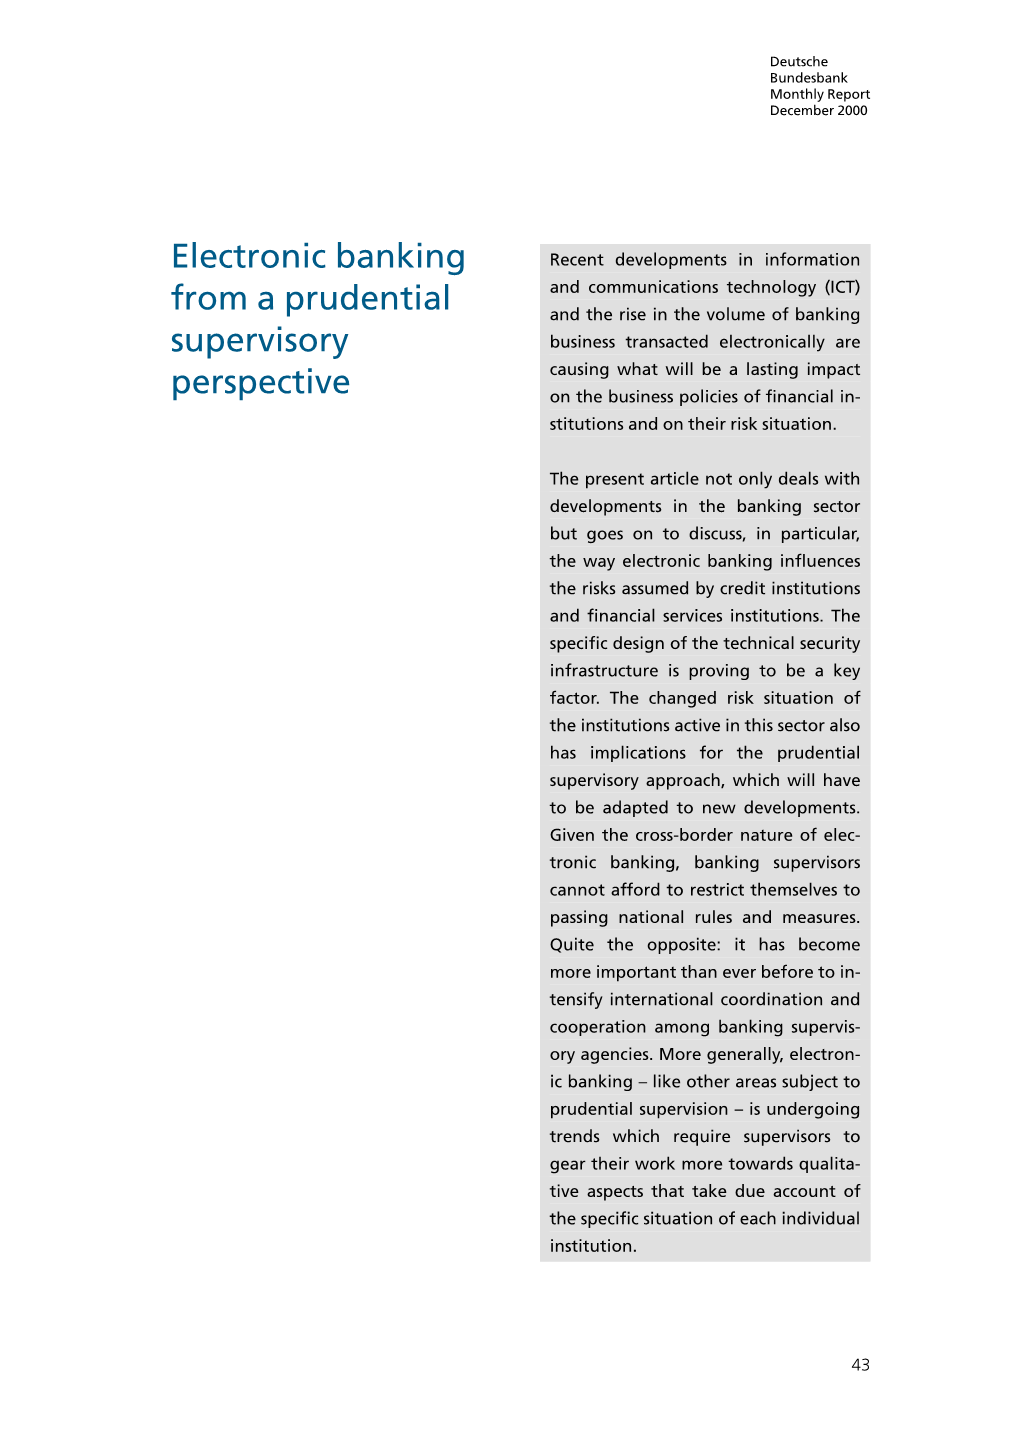 Electronic Banking from a Prudential Supervisory Perspective